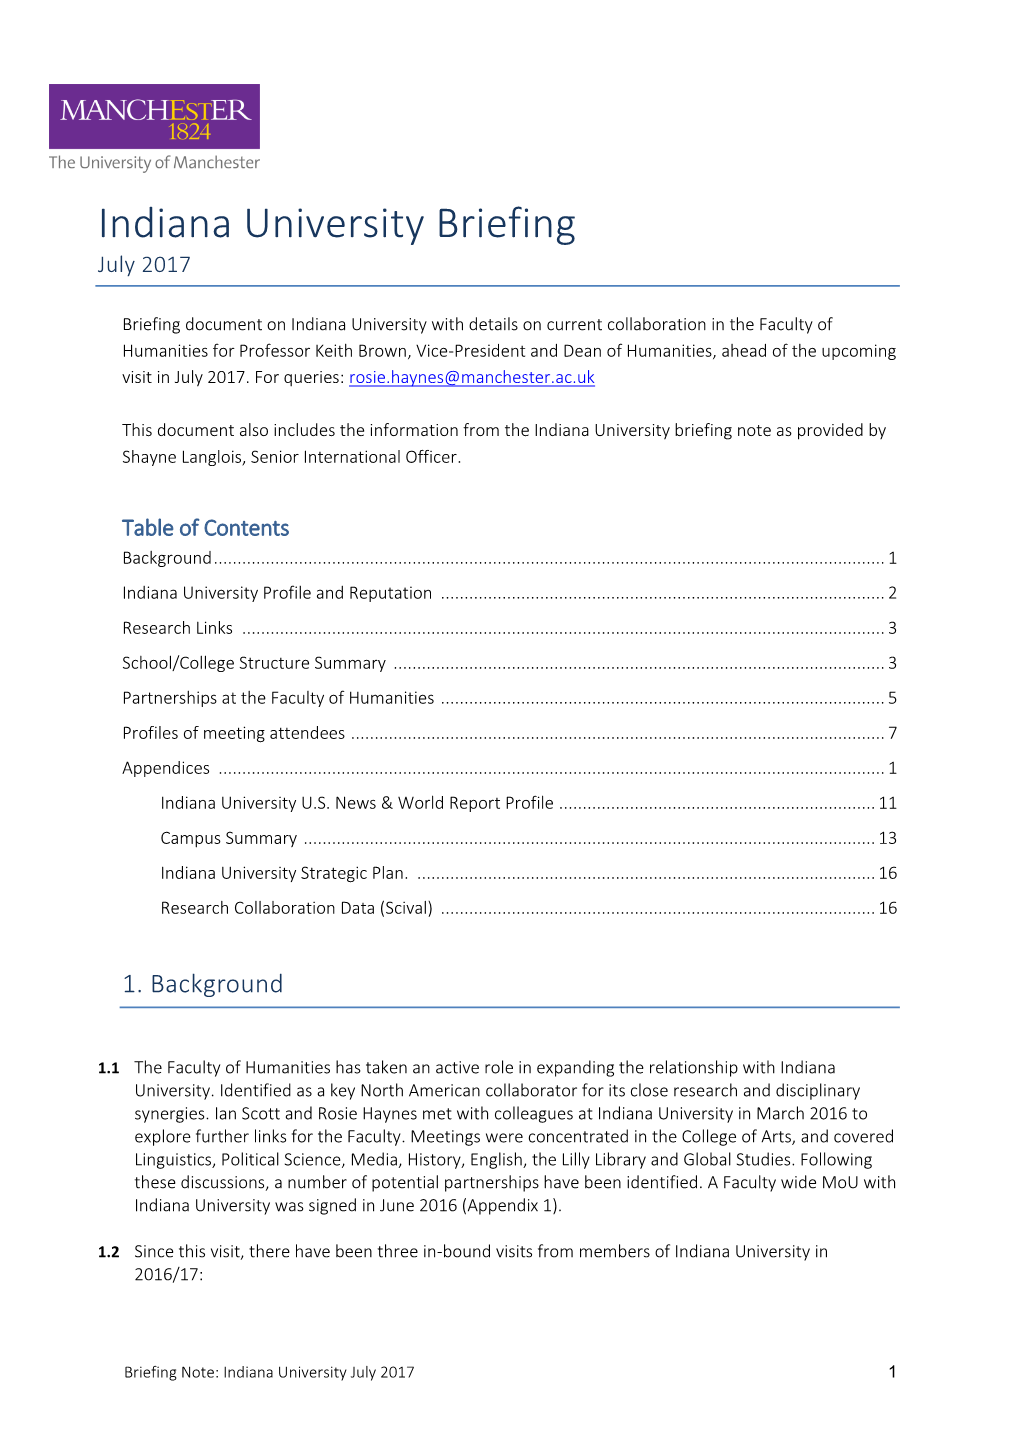 Indiana University Briefing July 2017